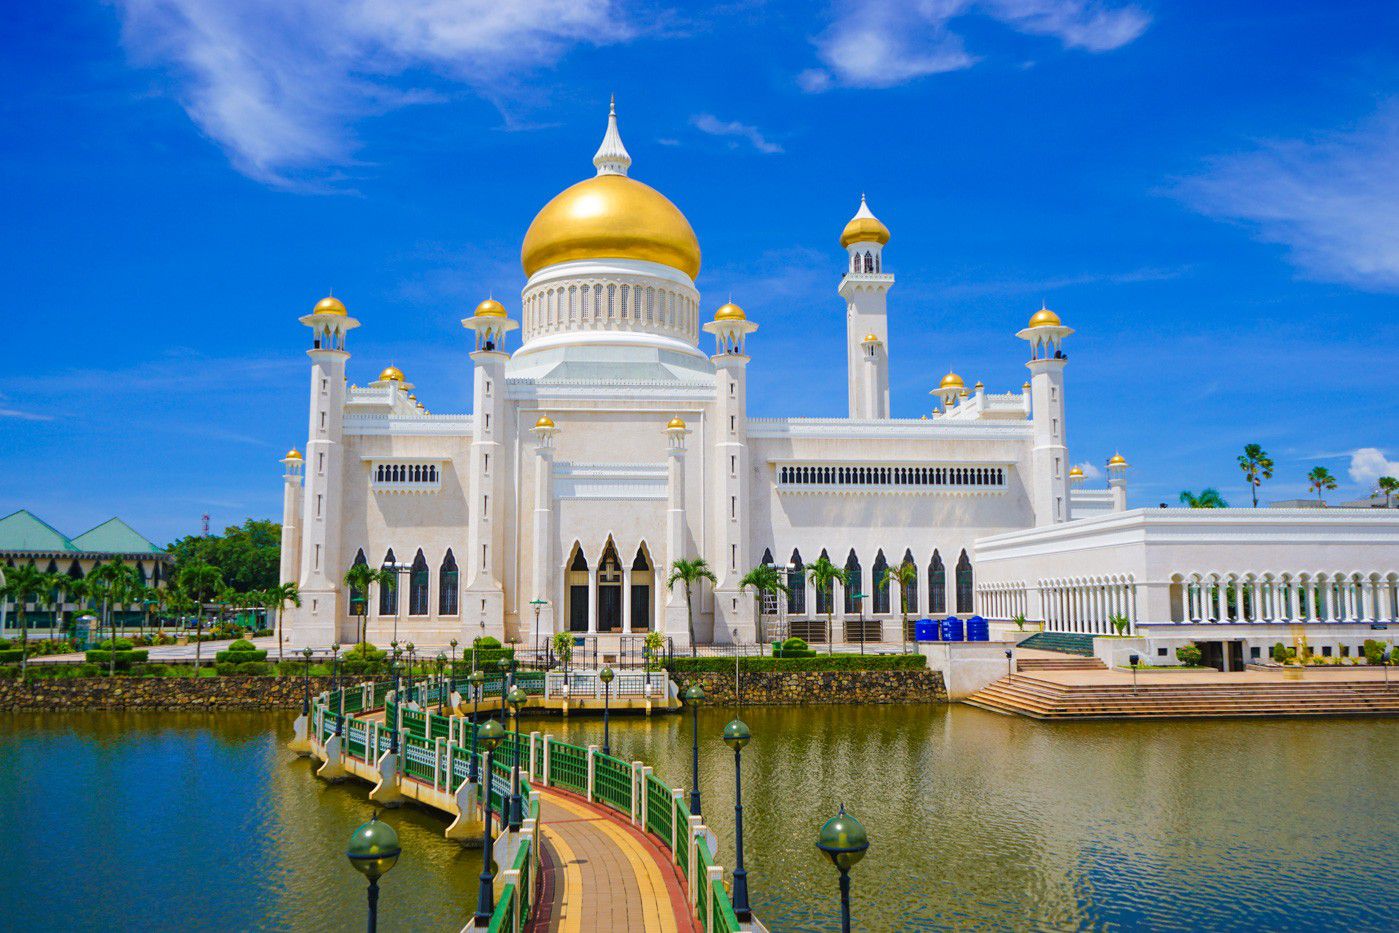 🗺 Can You Locate 18/24 of These Countries in the World? Bandar Seri Begawan, Brunei